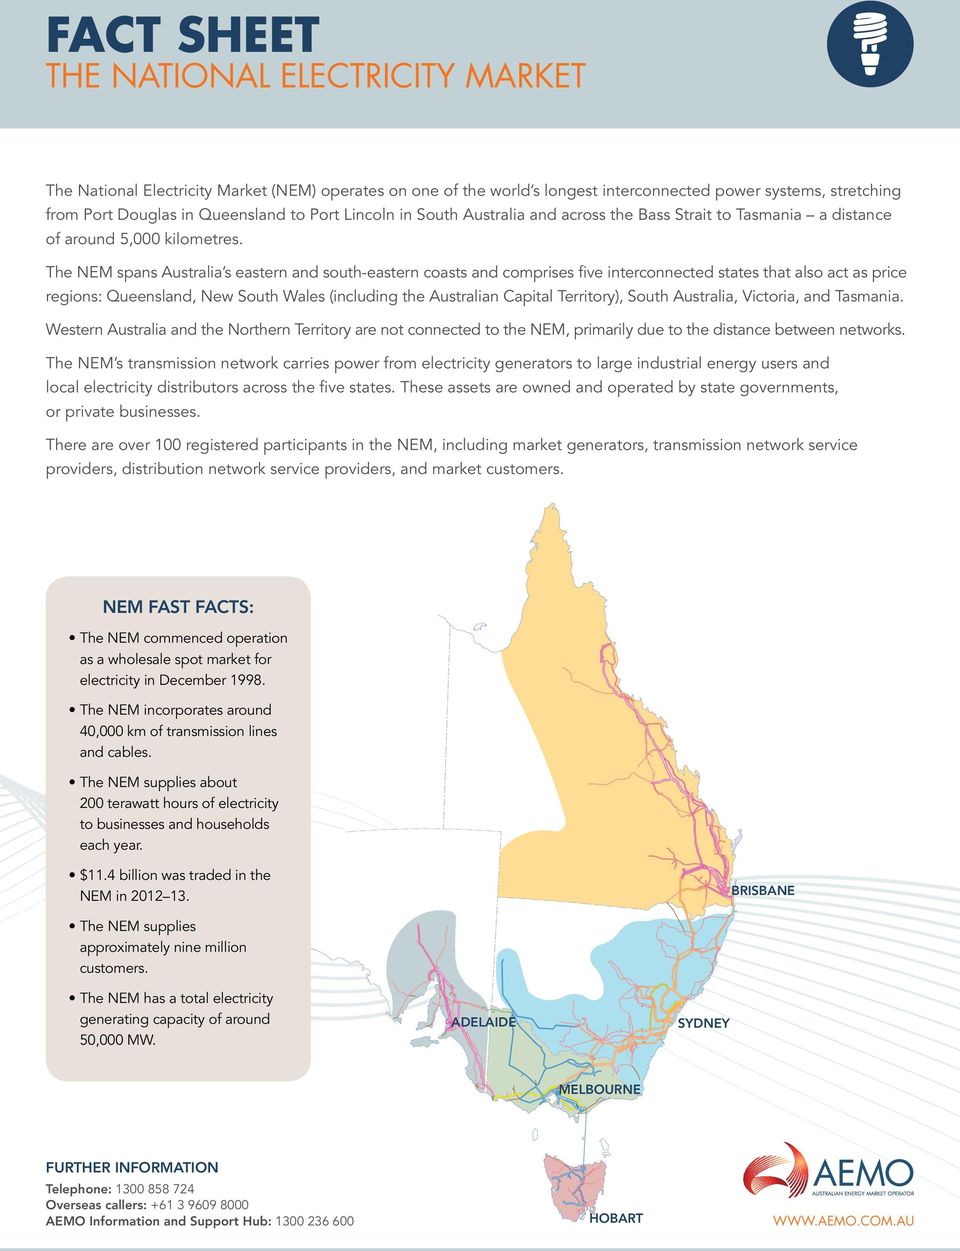 The NEM spans Australia s eastern and south-eastern coasts and comprises five interconnected states that also act as price regions: Queensland, New South Wales (including the Australian Capital